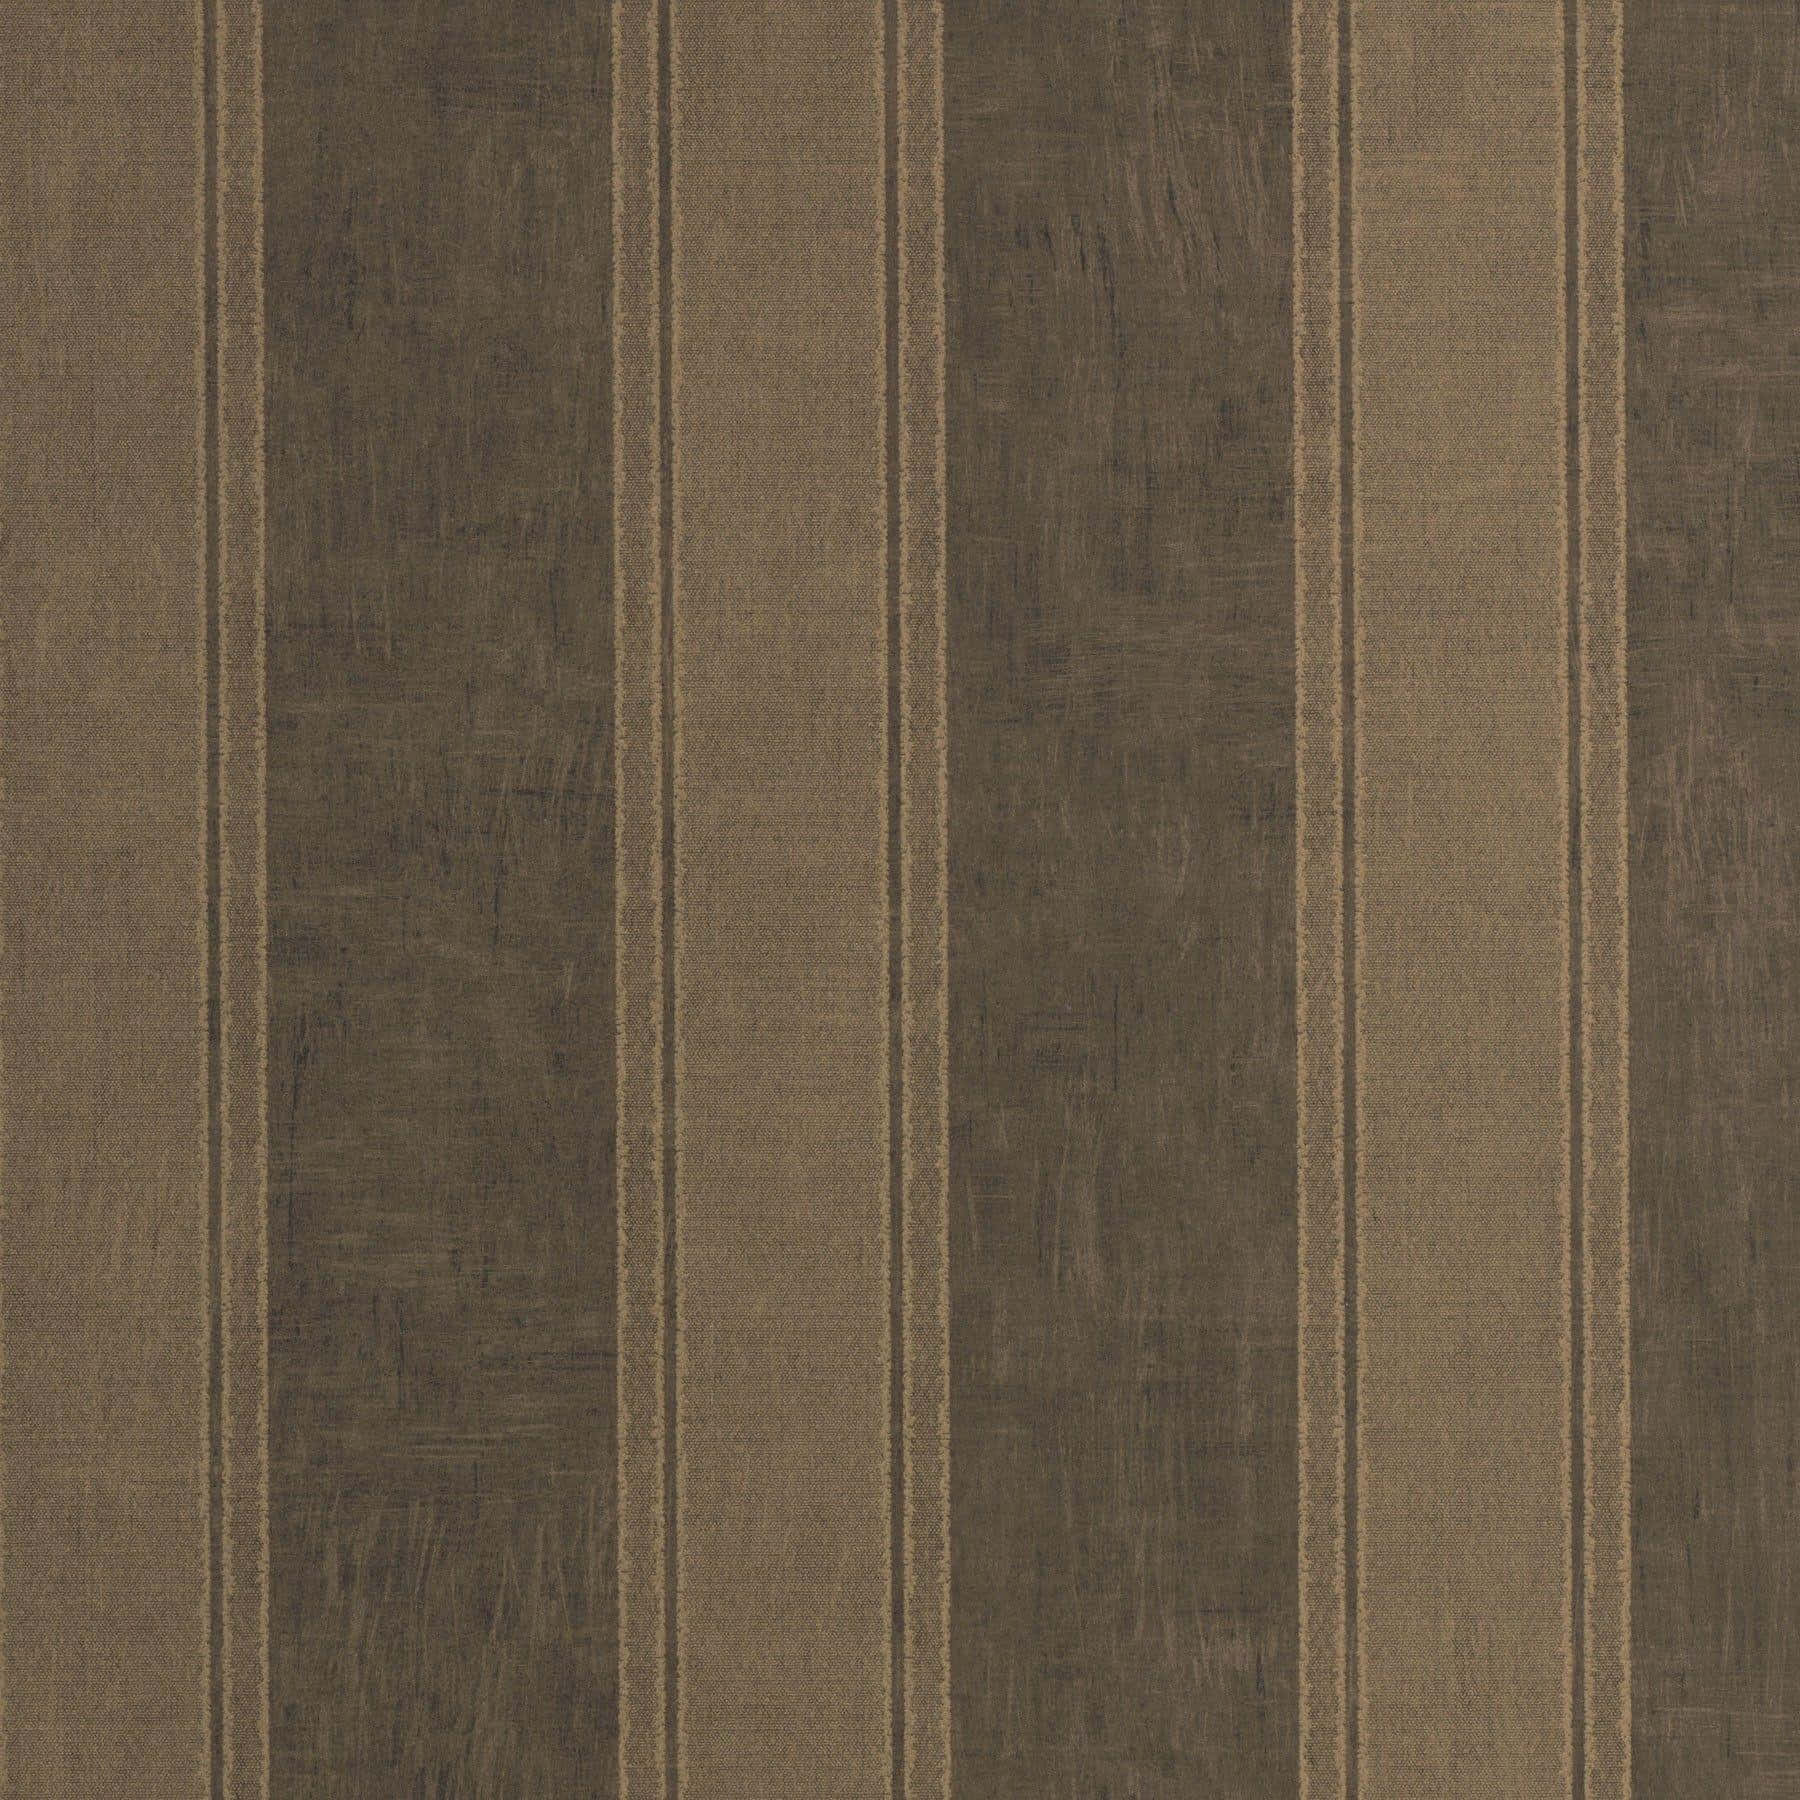 Smooth, warm tones of bronze look beautiful on any wall. Wallpaper